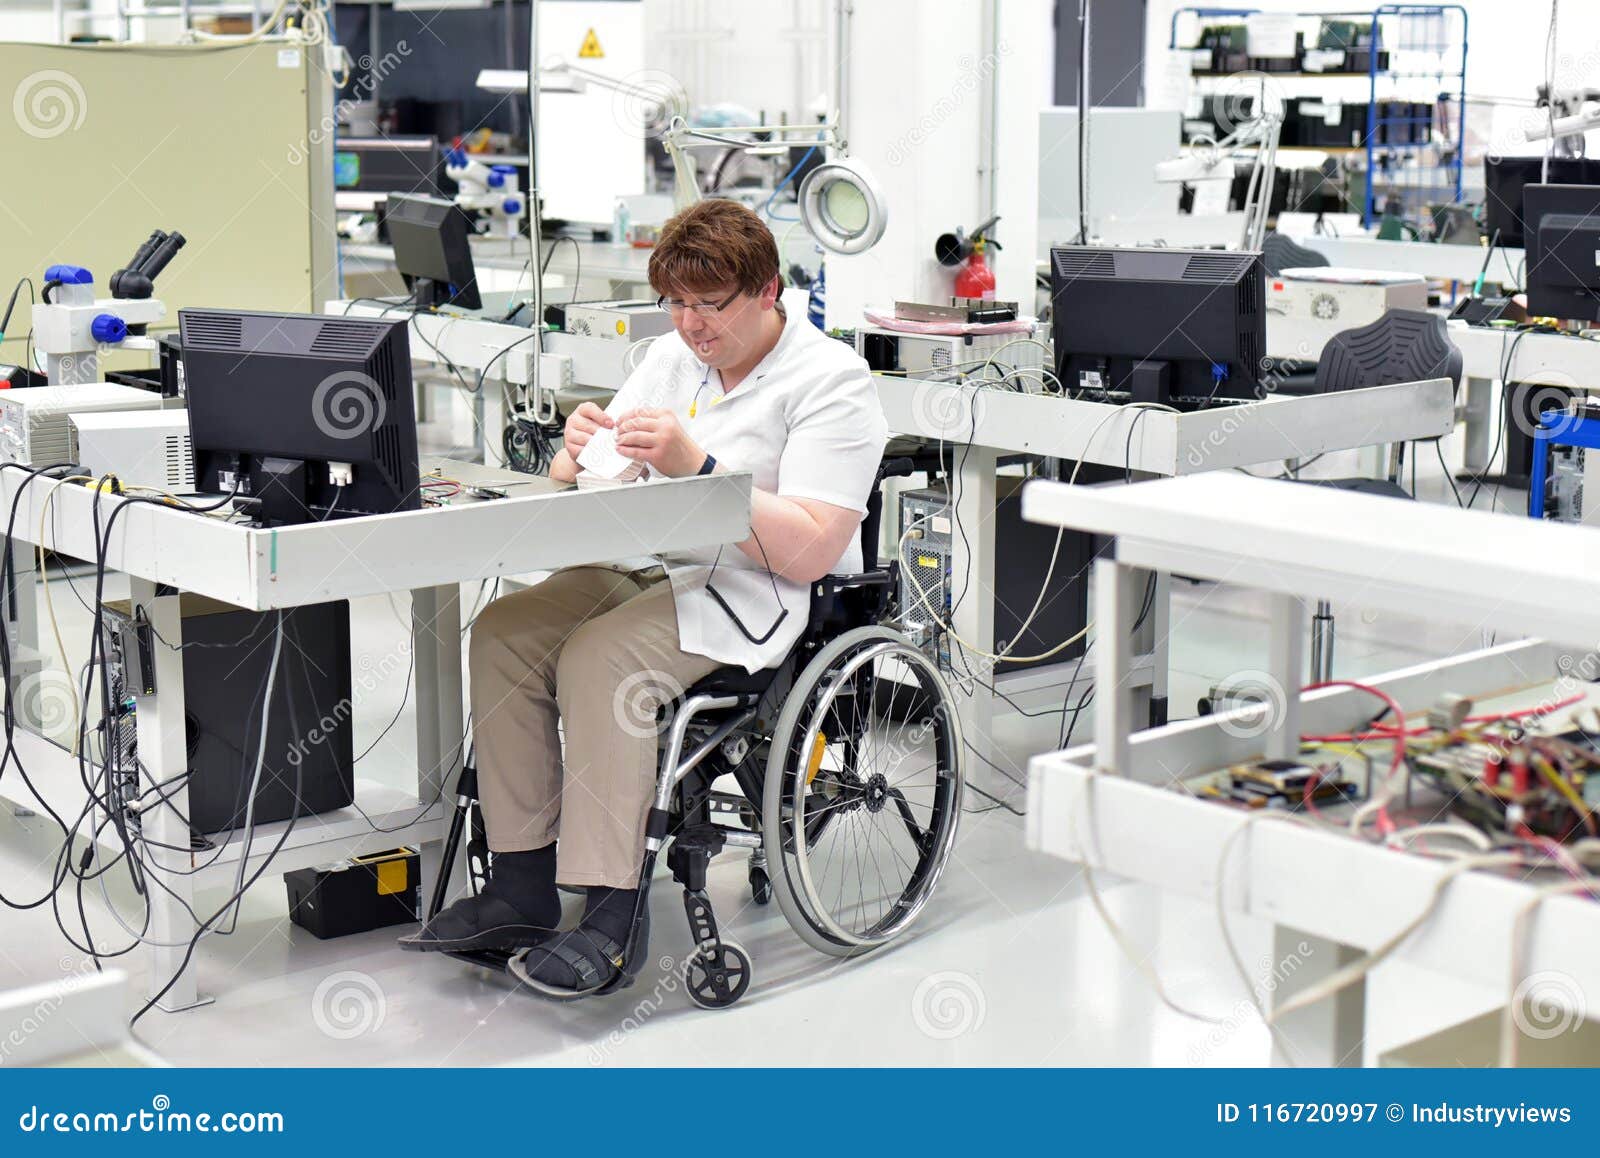 handicapped worker in a wheelchair assembling electronic components in a modern factory at the workplace